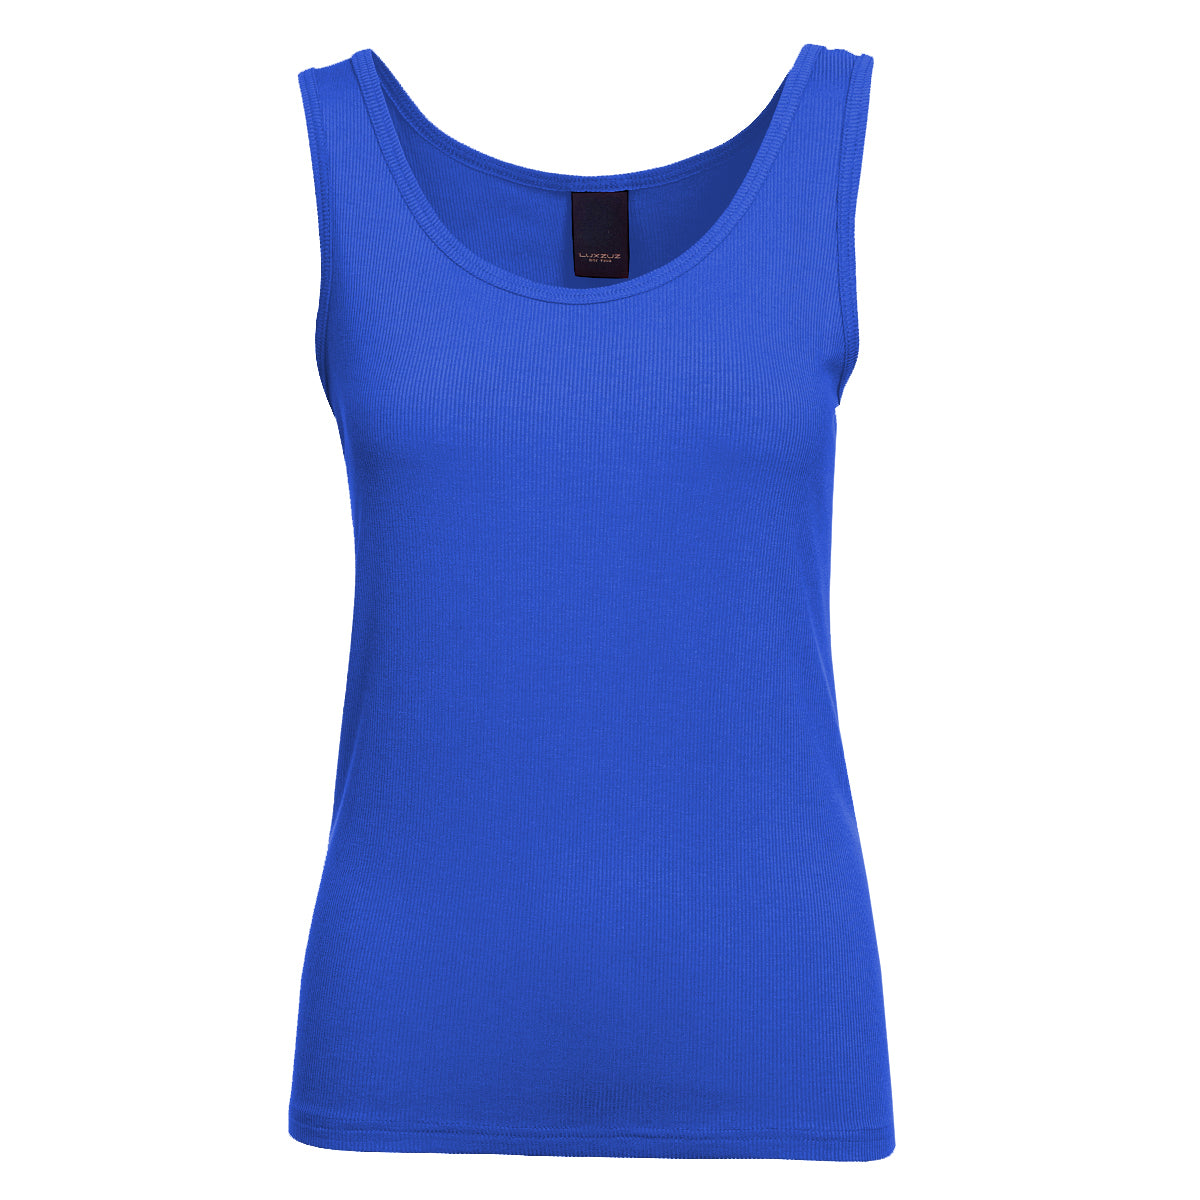 LUXZUZ // ONE TWO Adelina Top Top 558 Dazzling Blue